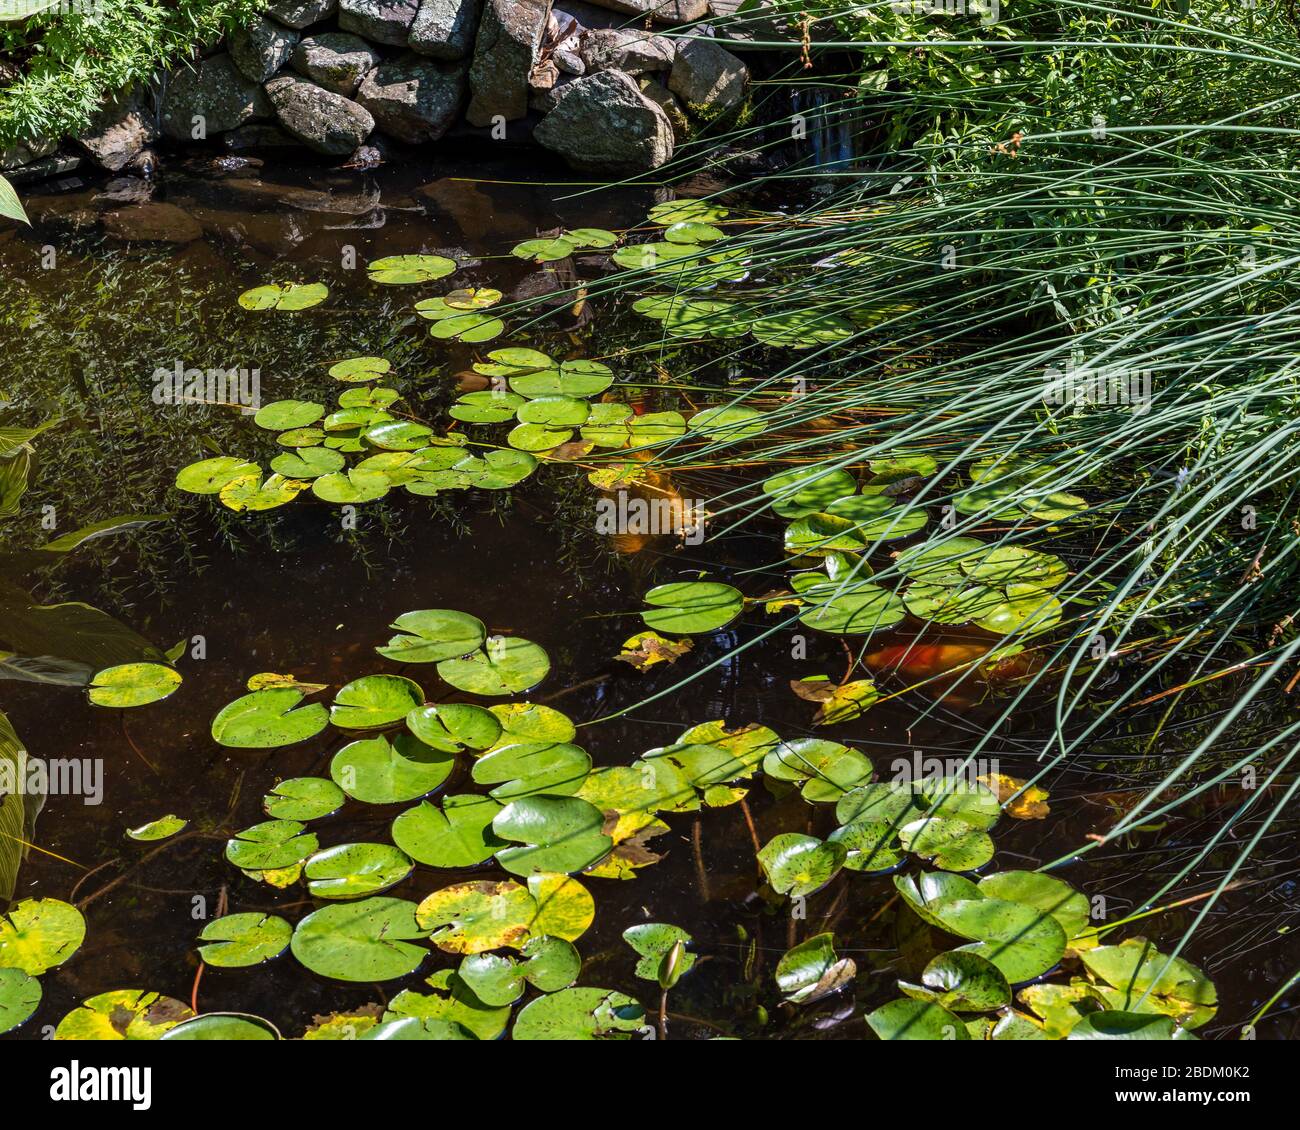 Koi pond with lily pads and long grass Bruce N Murray Photography (brucenmurray.com) Stock Photo